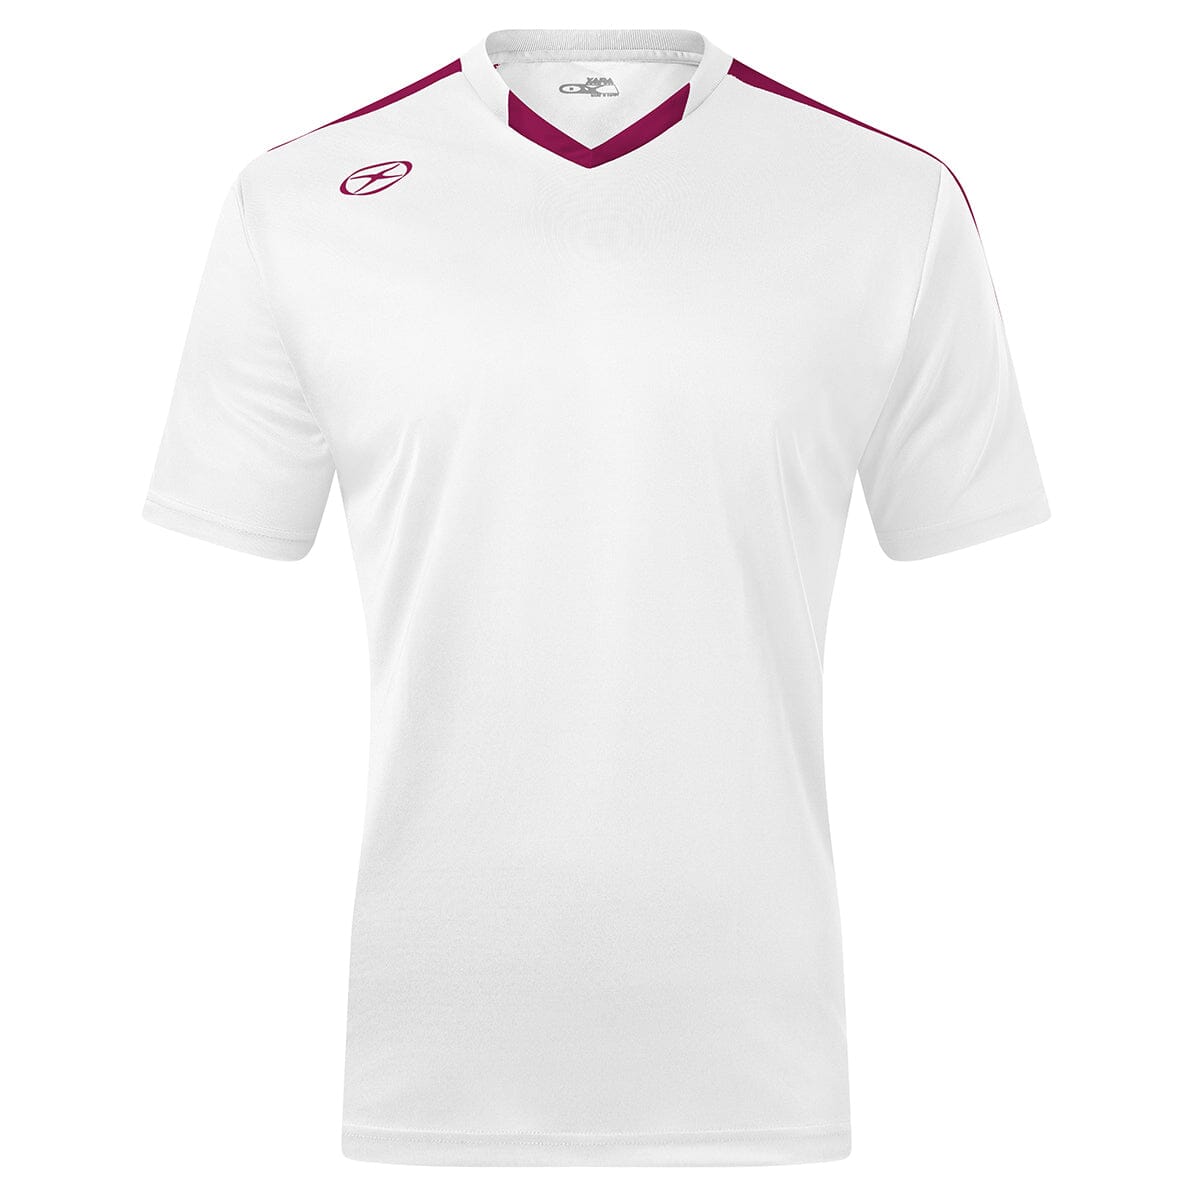 Britannia Jersey - Away Colors - Male Shirt Xara Soccer White/Maroon Youth Large 